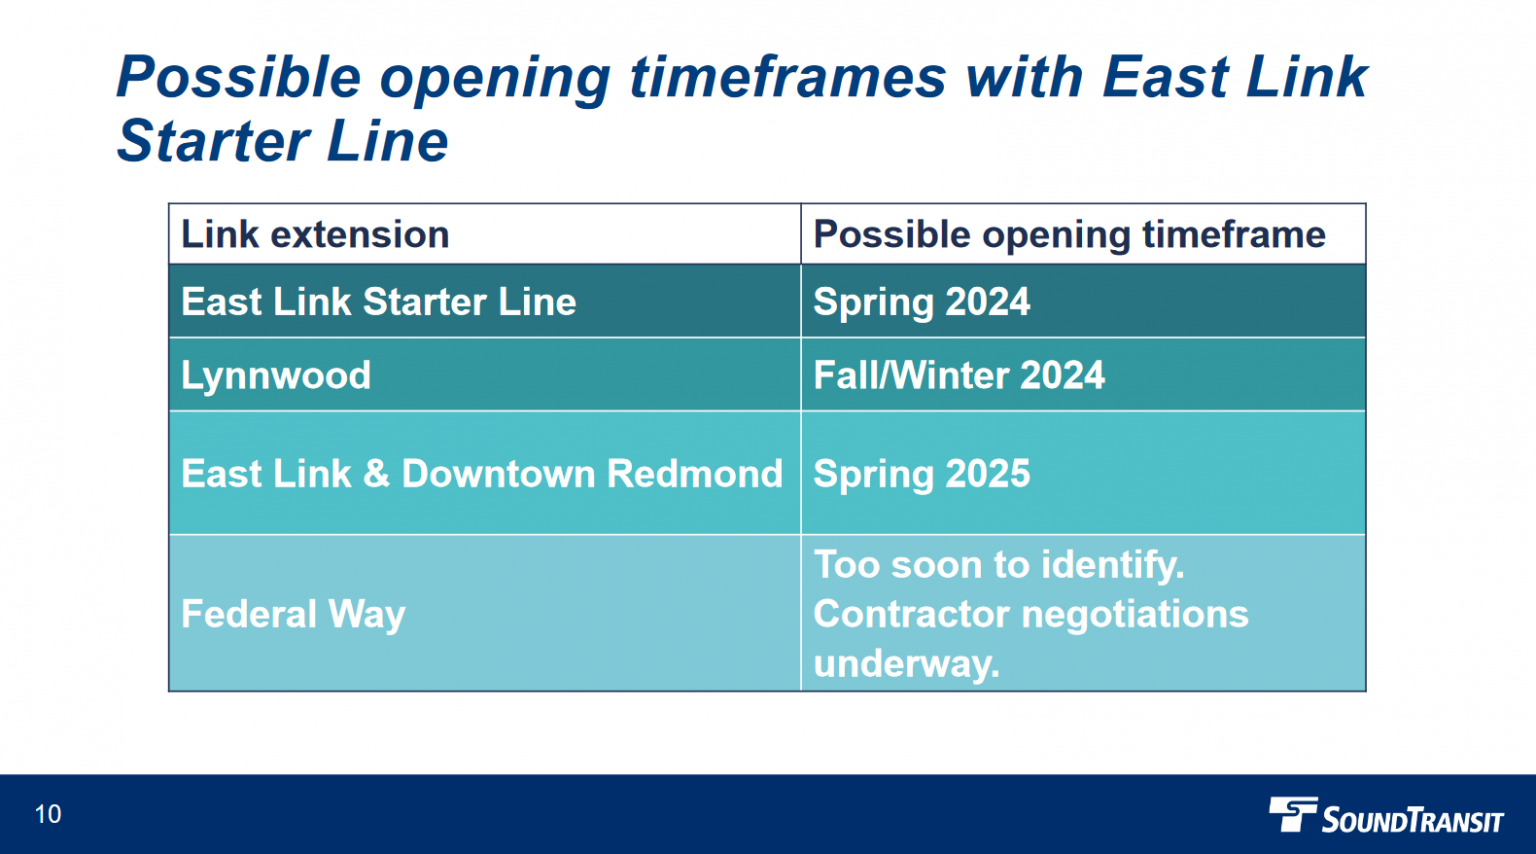 East Link Light Rail Delayed to Spring 2025 but Could Arrive Earlier